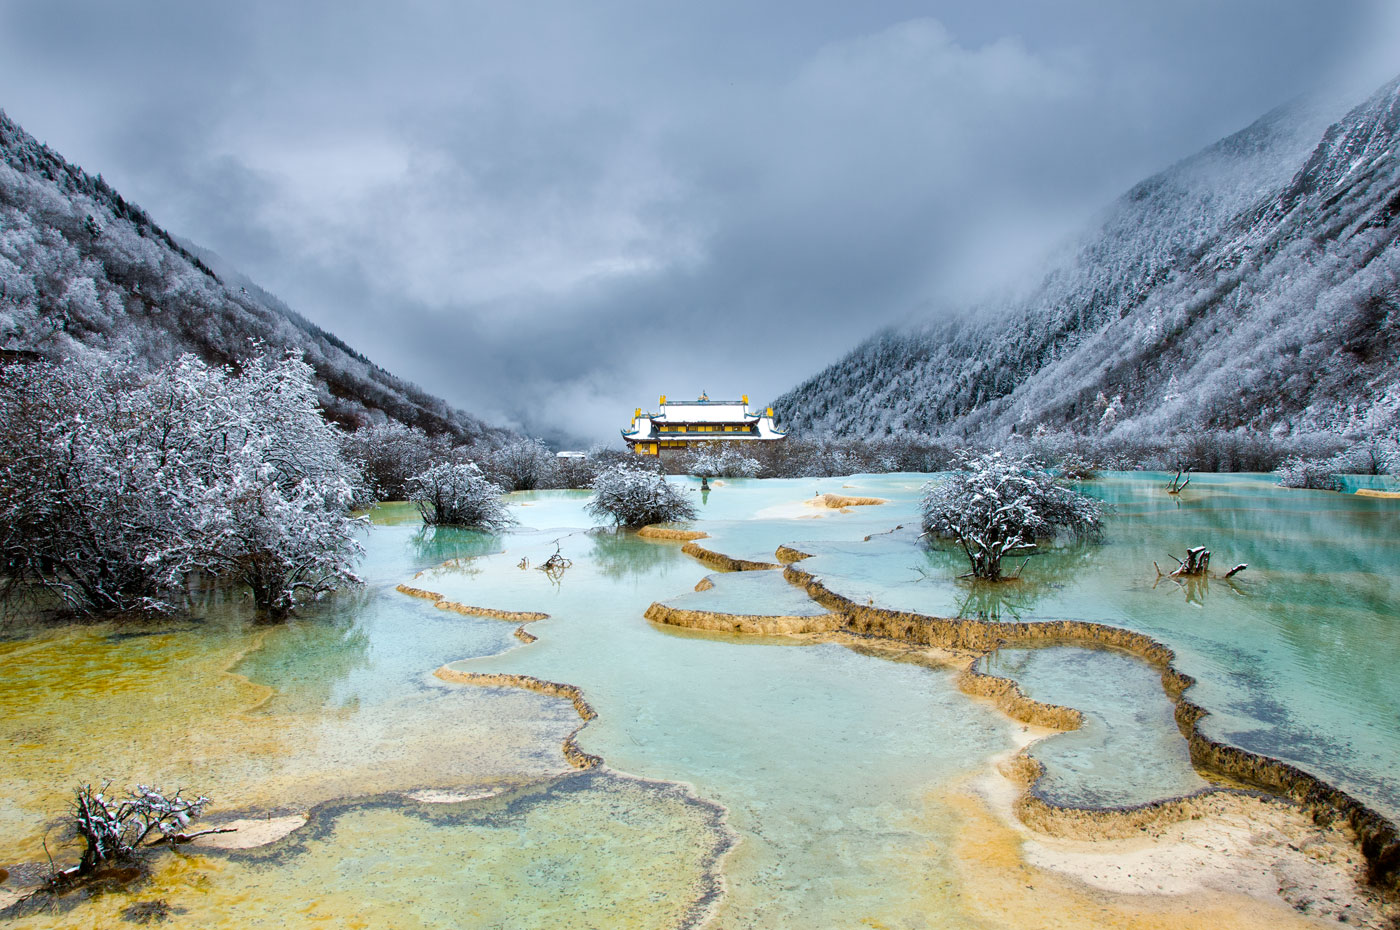 No. 14: Marvel at the multicolored ponds of Huanglong NP when the first snow turns the place into a fairy-tale atmosphere - Huanglong NP, Tibetan China, 2010